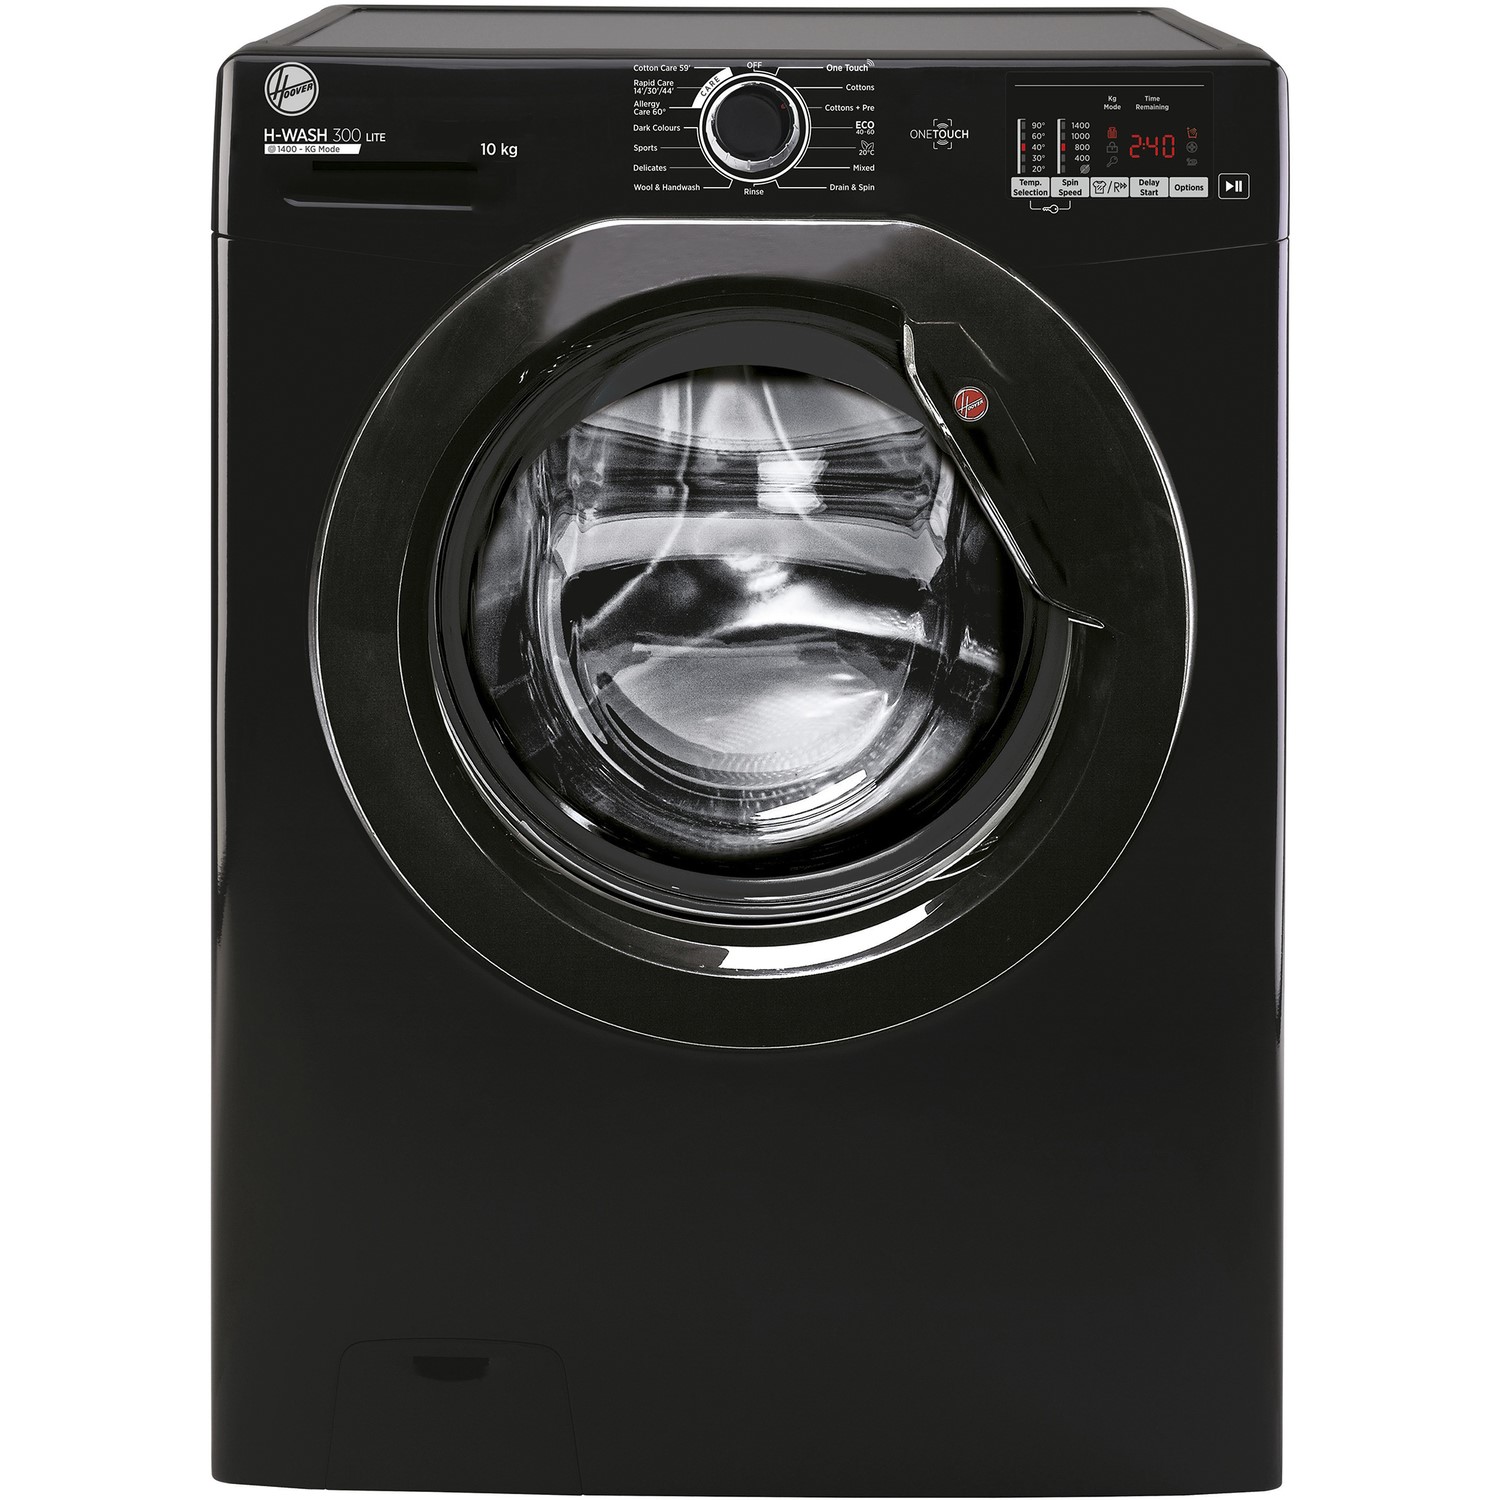 Photos - Other for Computer Hoover H-Wash 300 lite 10kg 1400rpm Washing Machine - Black 31019245 